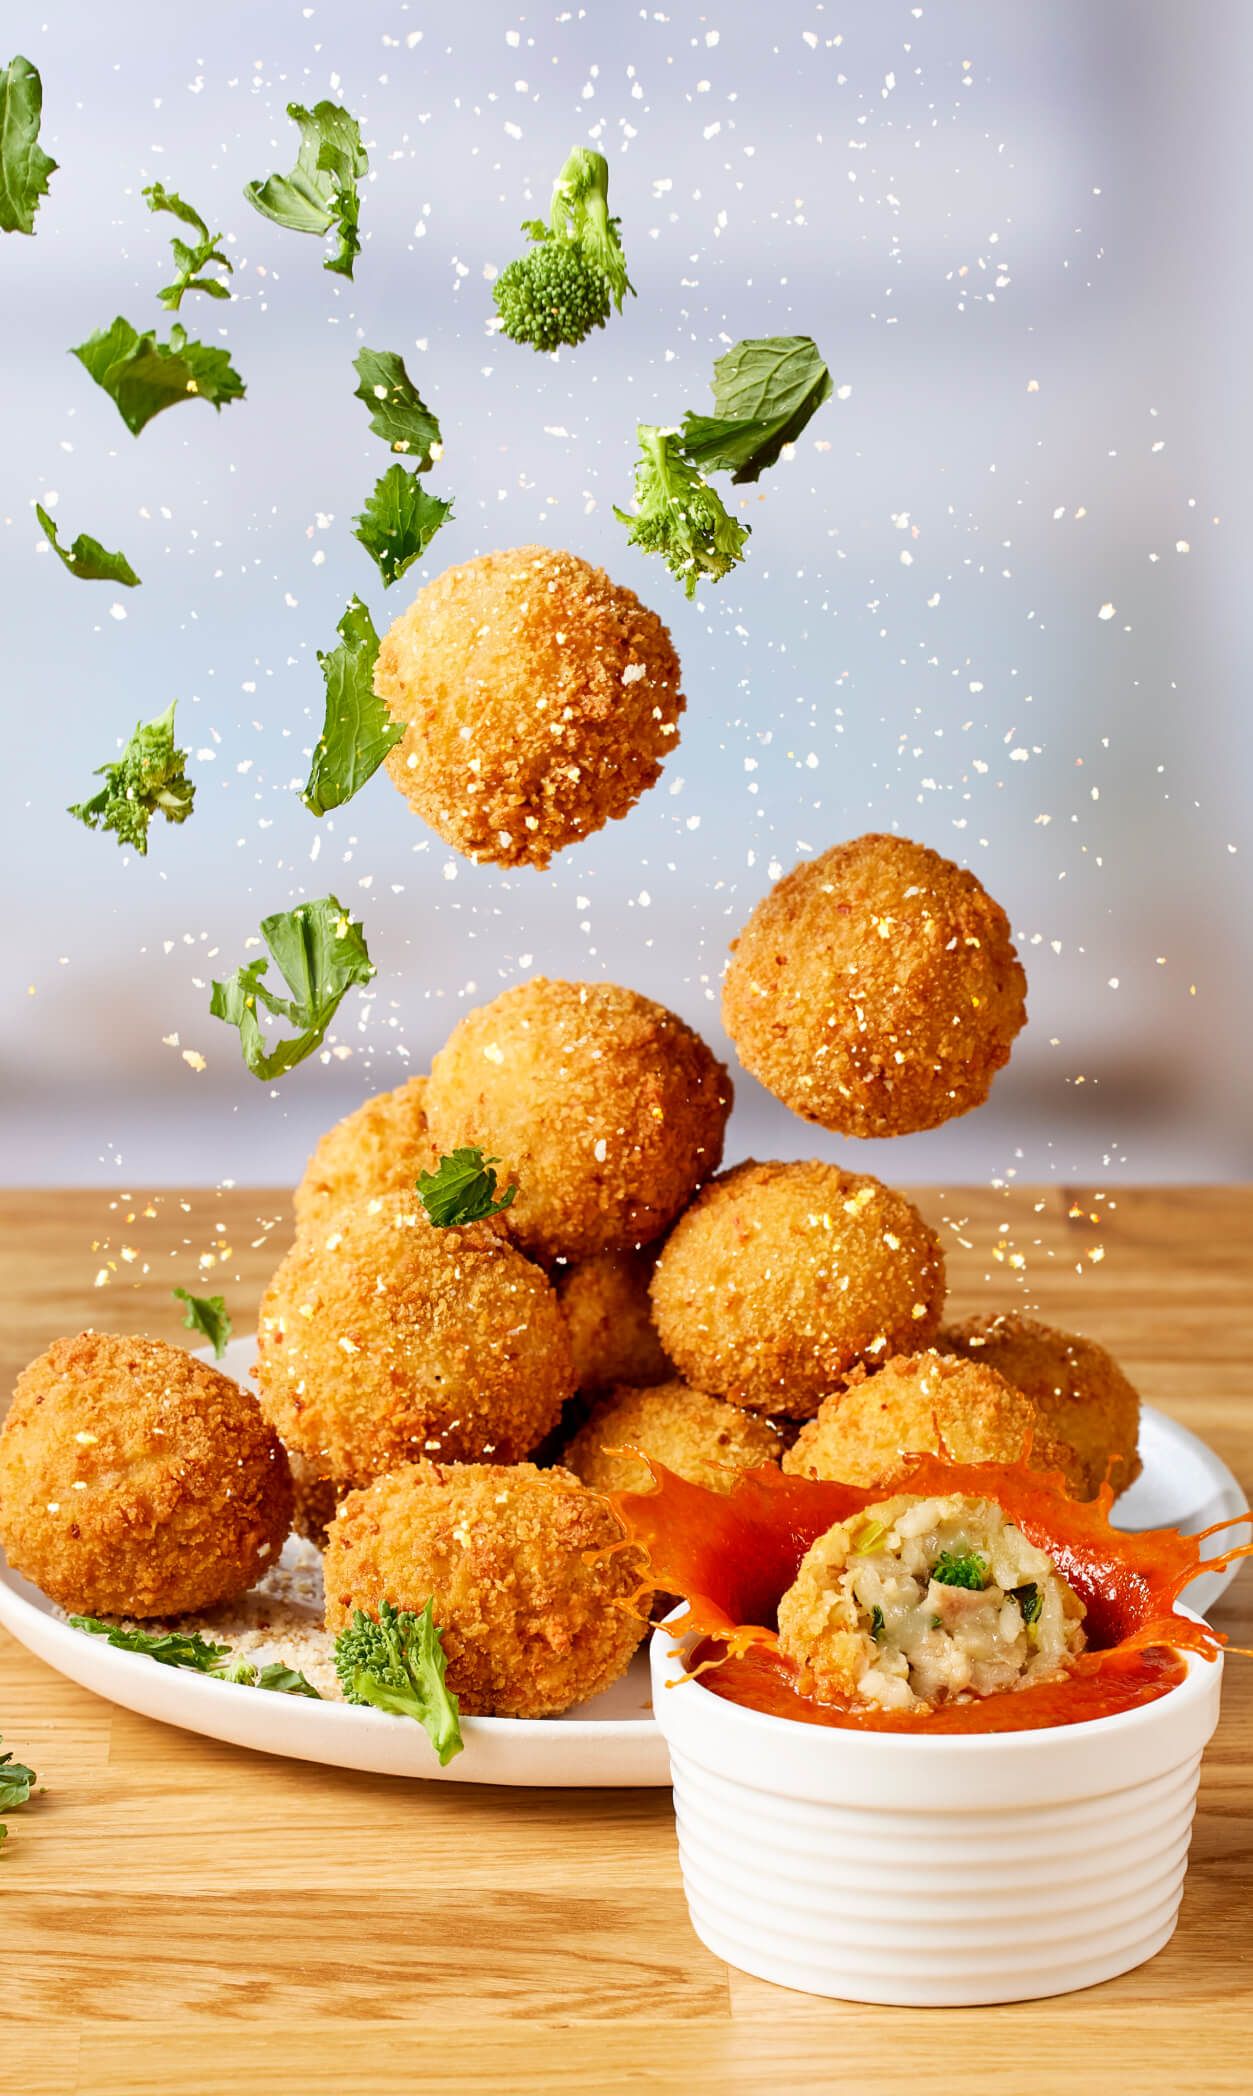 Quaker Steel Cut Arancini with herbs and sauce.